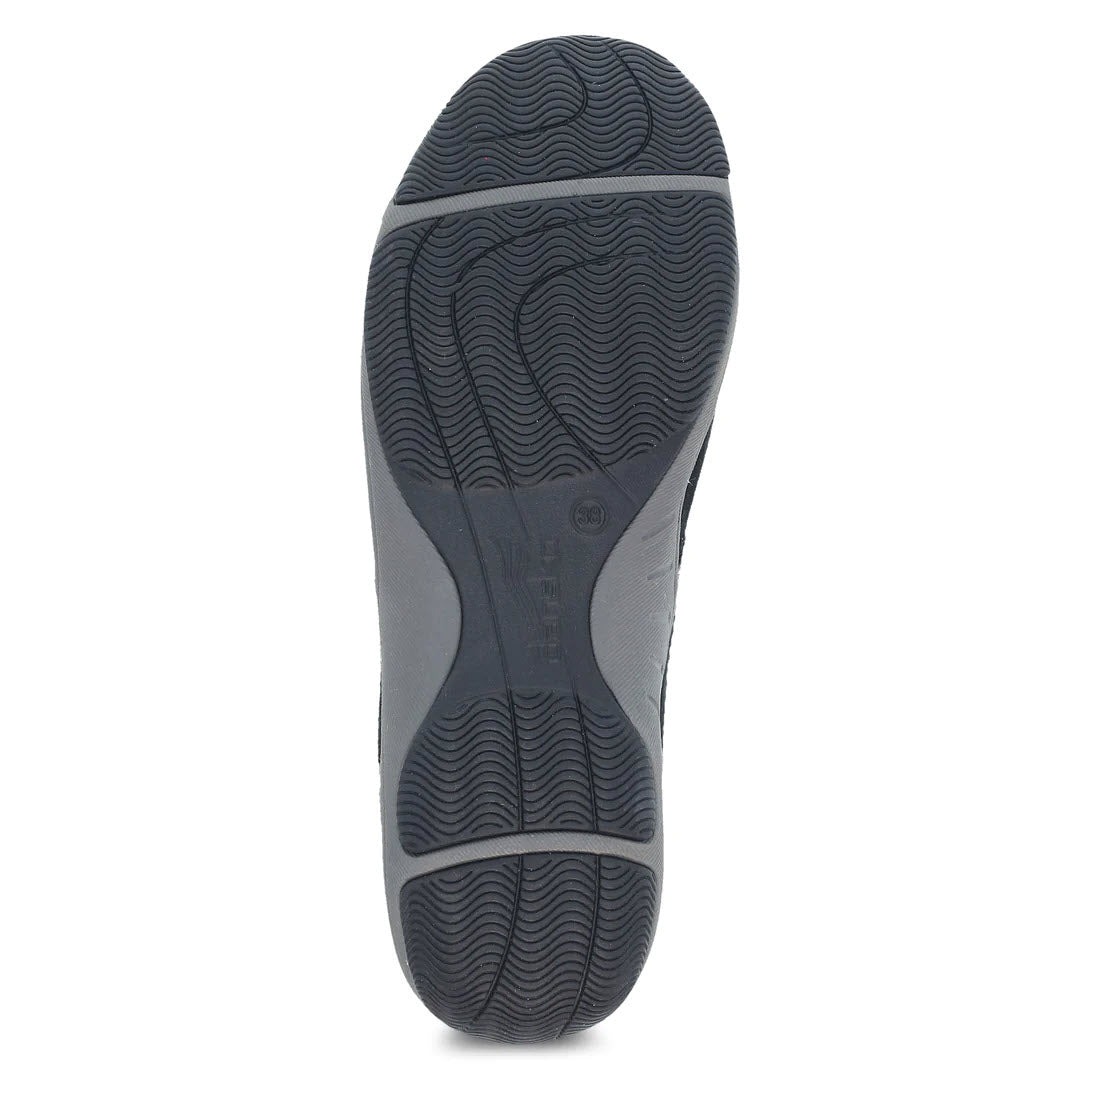 Bottom view of a Dansko Harlyn Black - Womens sneaker displaying a textured gray sole with wavy patterns and a circular logo at the center.